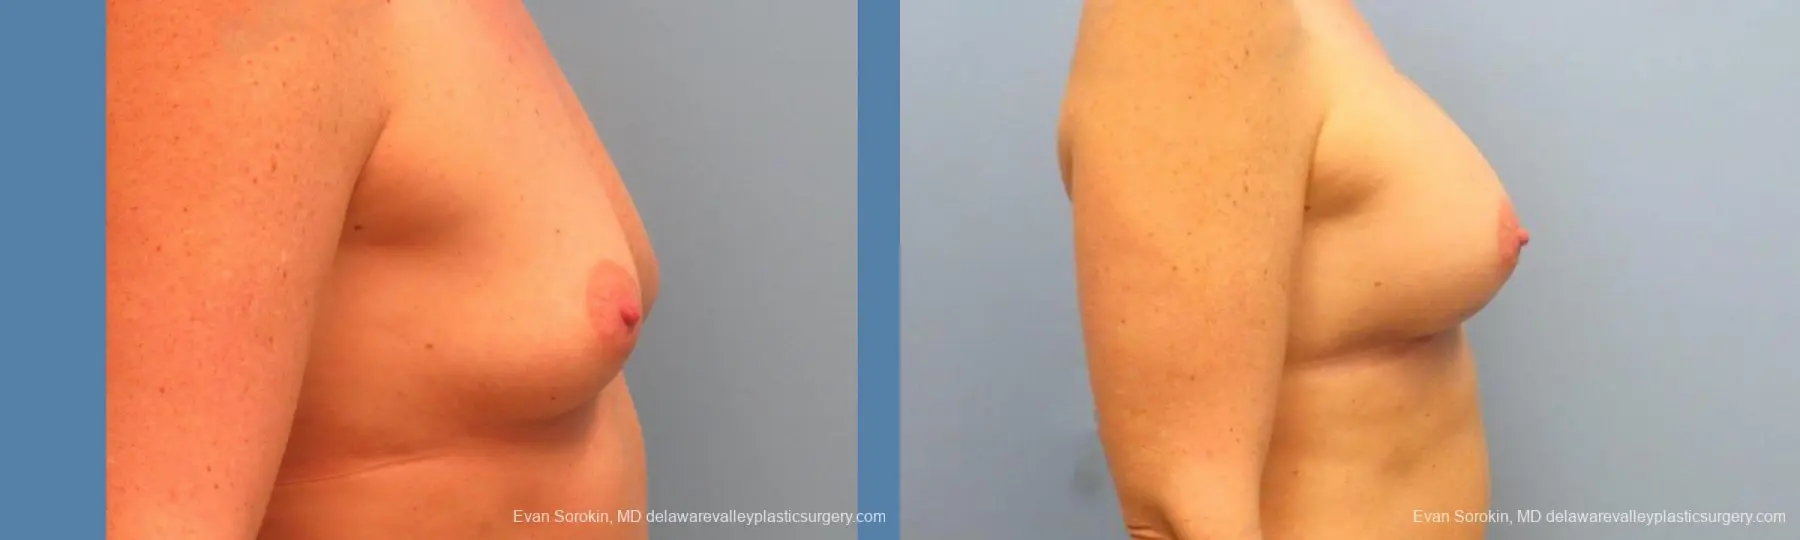 Philadelphia Breast Augmentation 9487 - Before and After 3